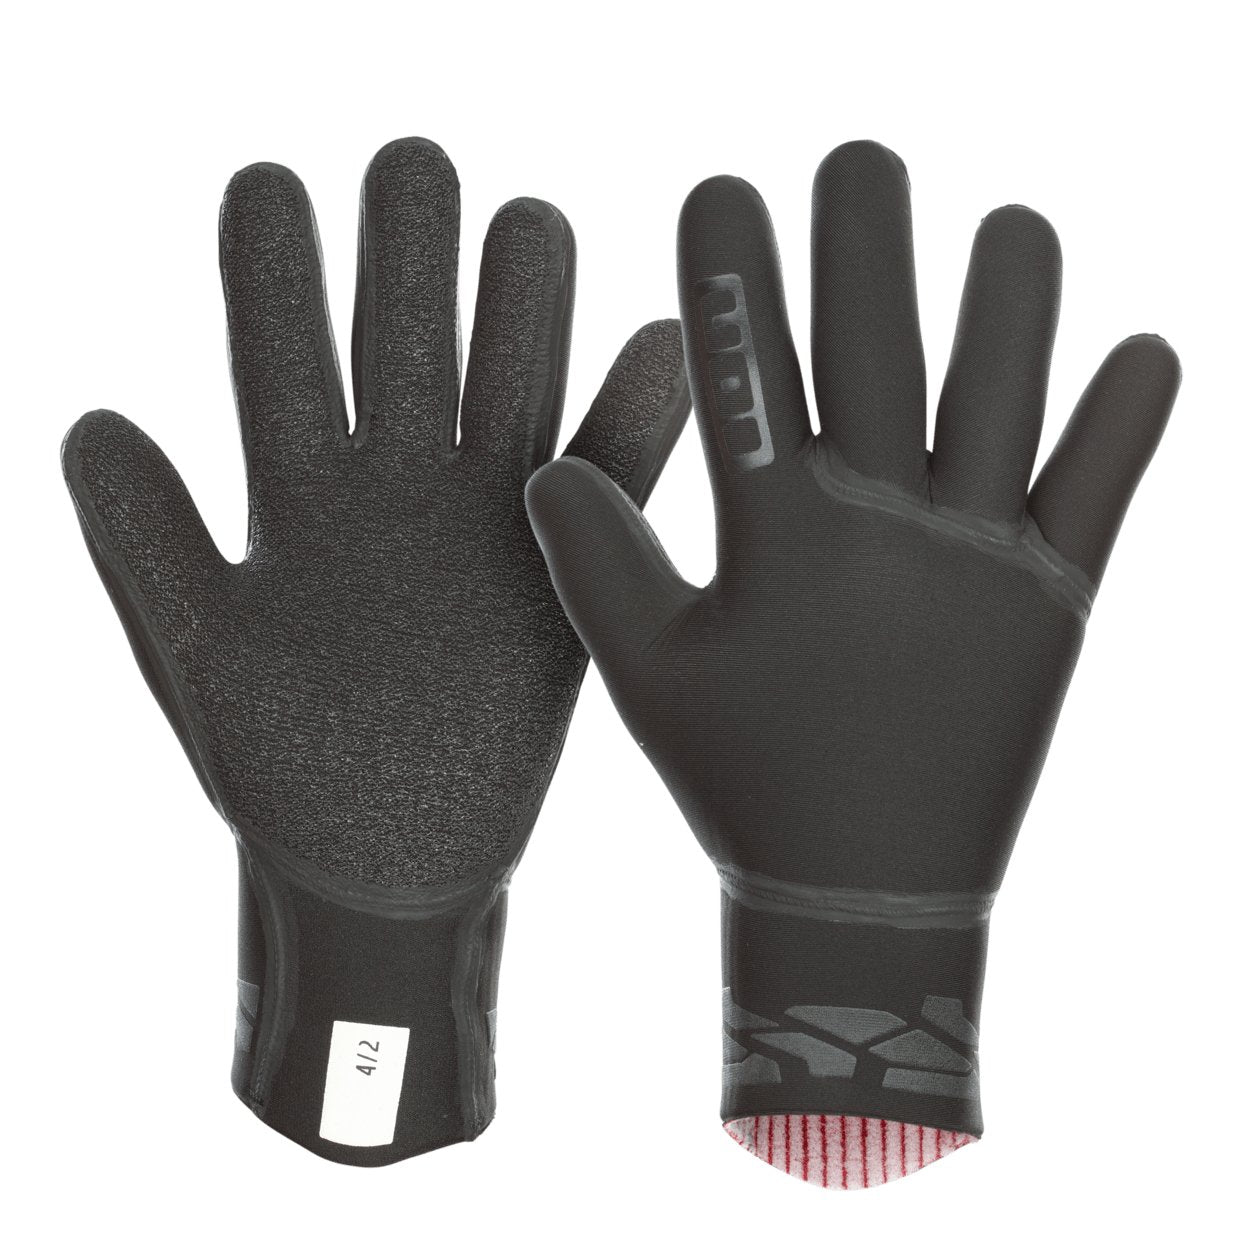 ION Neo Gloves 4/2 2022 - Worthing Watersports - 9008415882953 - Neo Accessories - ION Water